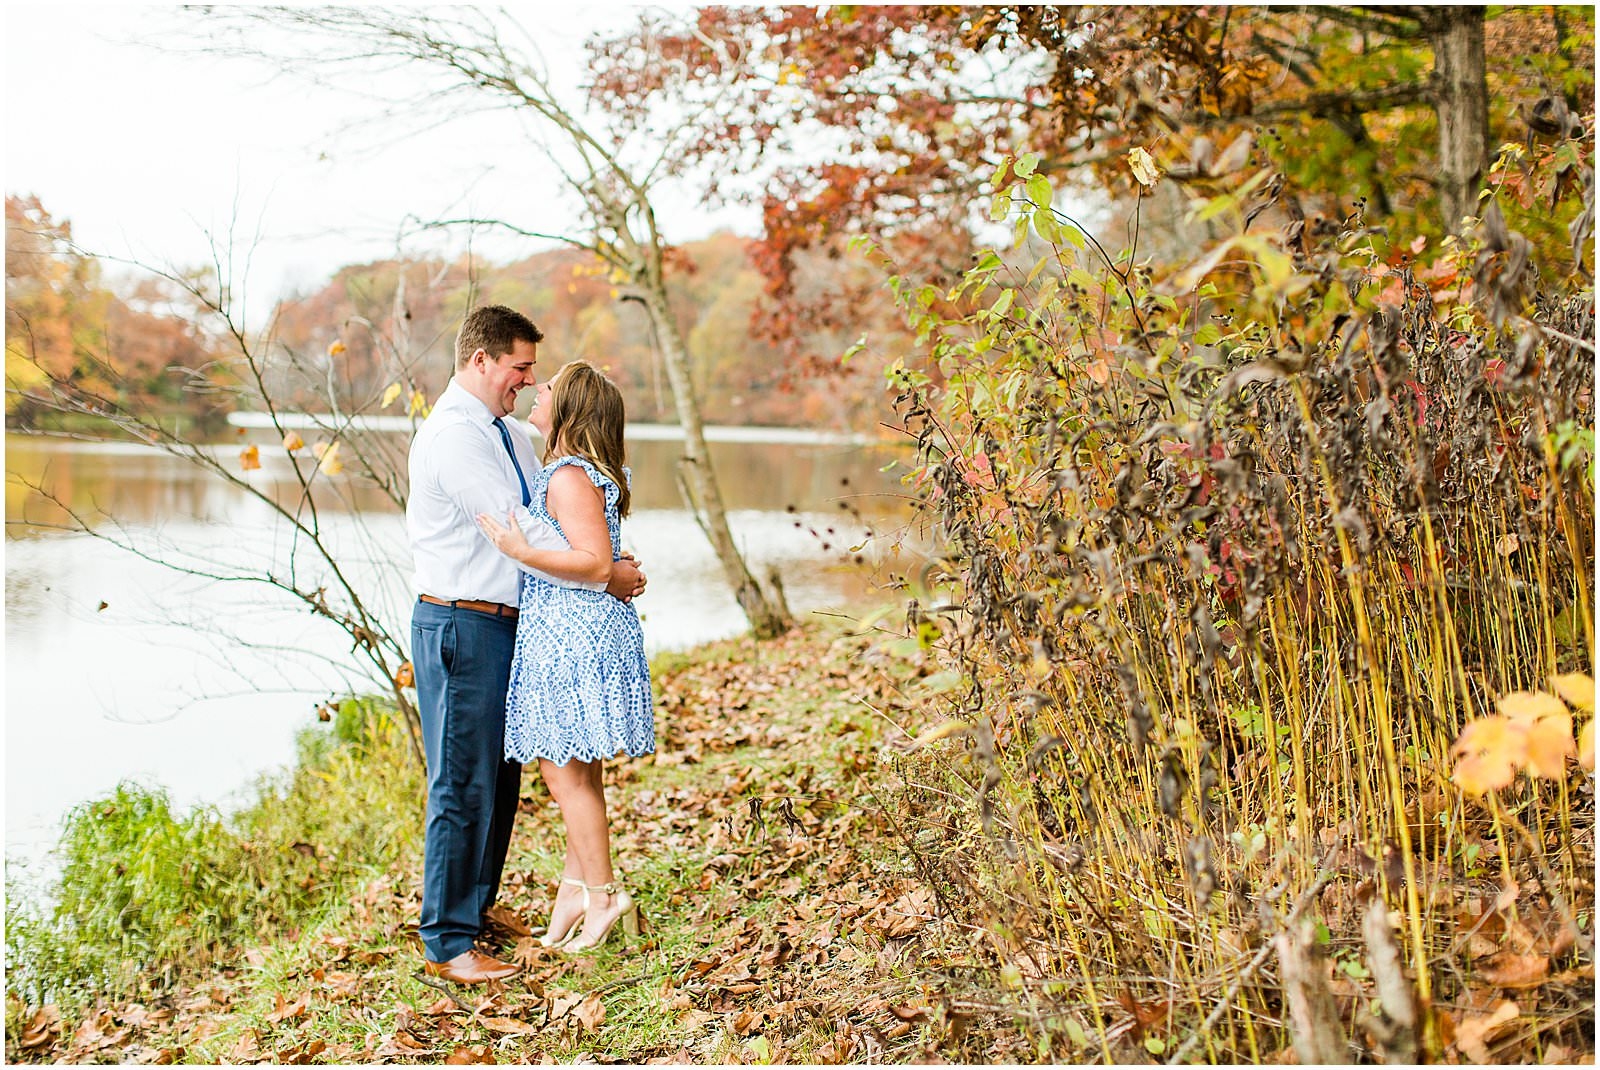 A Southern Illinois Engagement Session | Roxanne and Matthew | Bret and Brandie Photography 0008.jpg